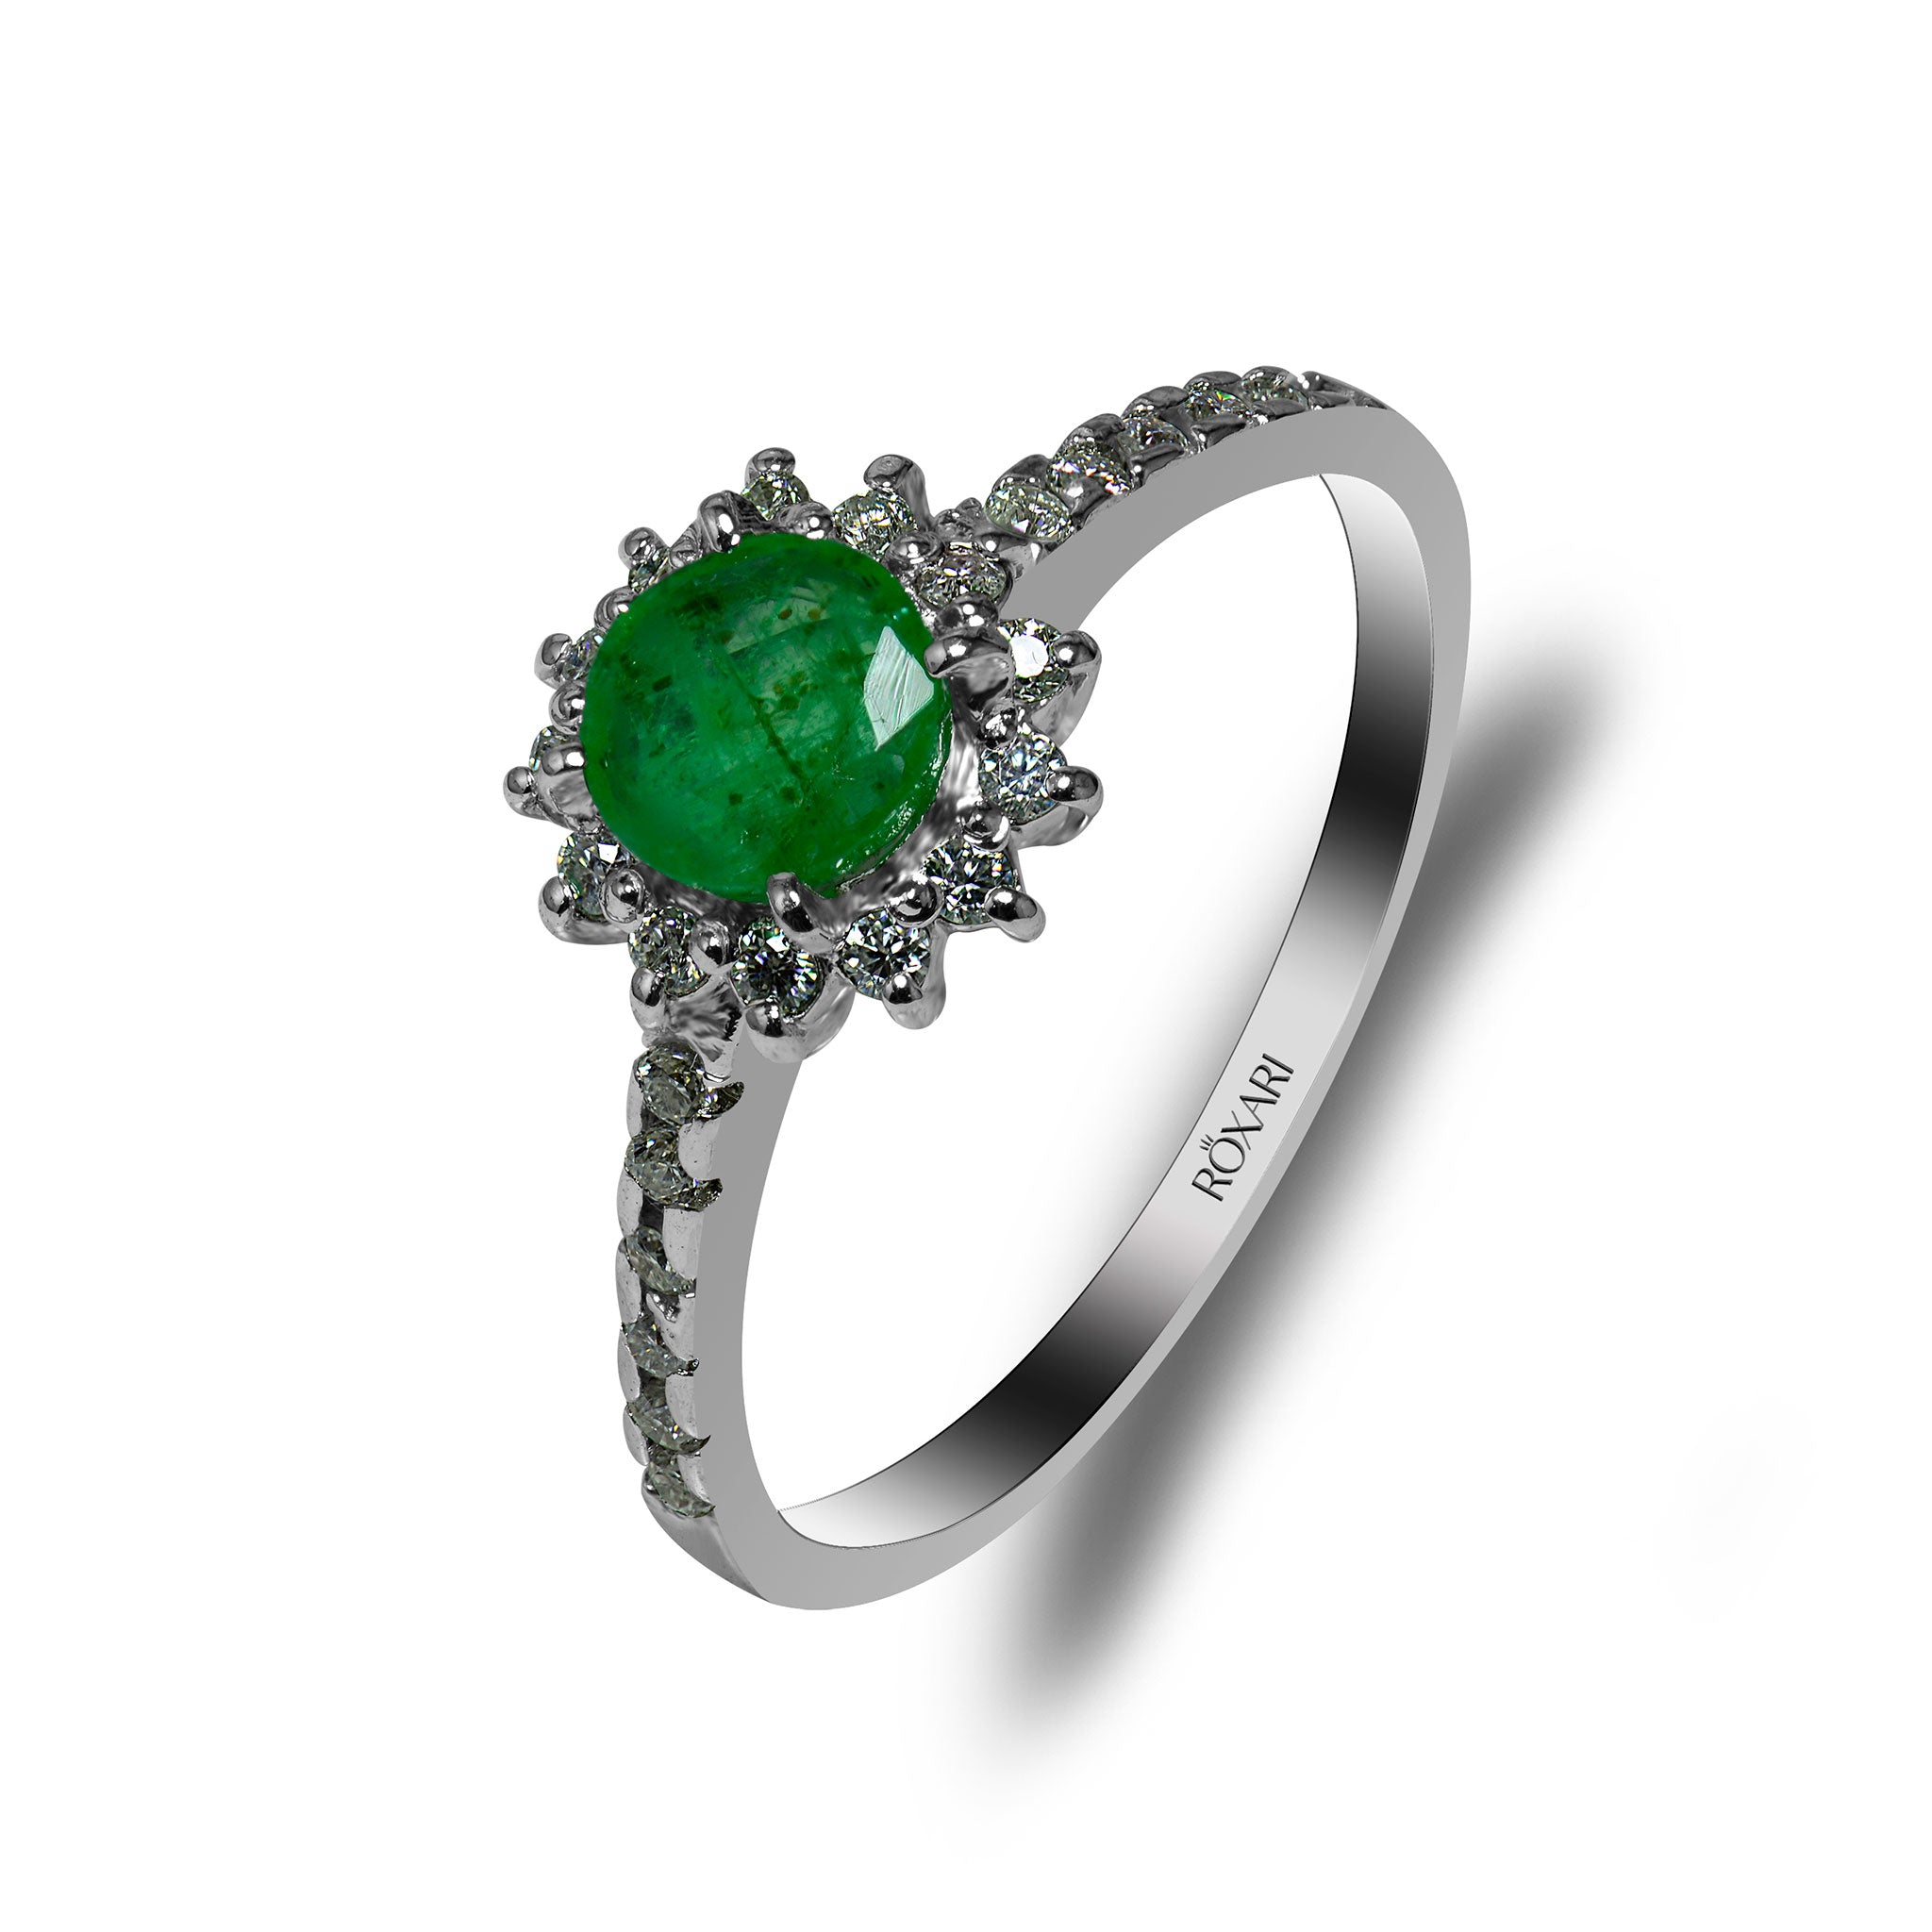 3x3 Emerald Diamond Ring 67677: buy online in NYC. Best price at TRAXNYC.